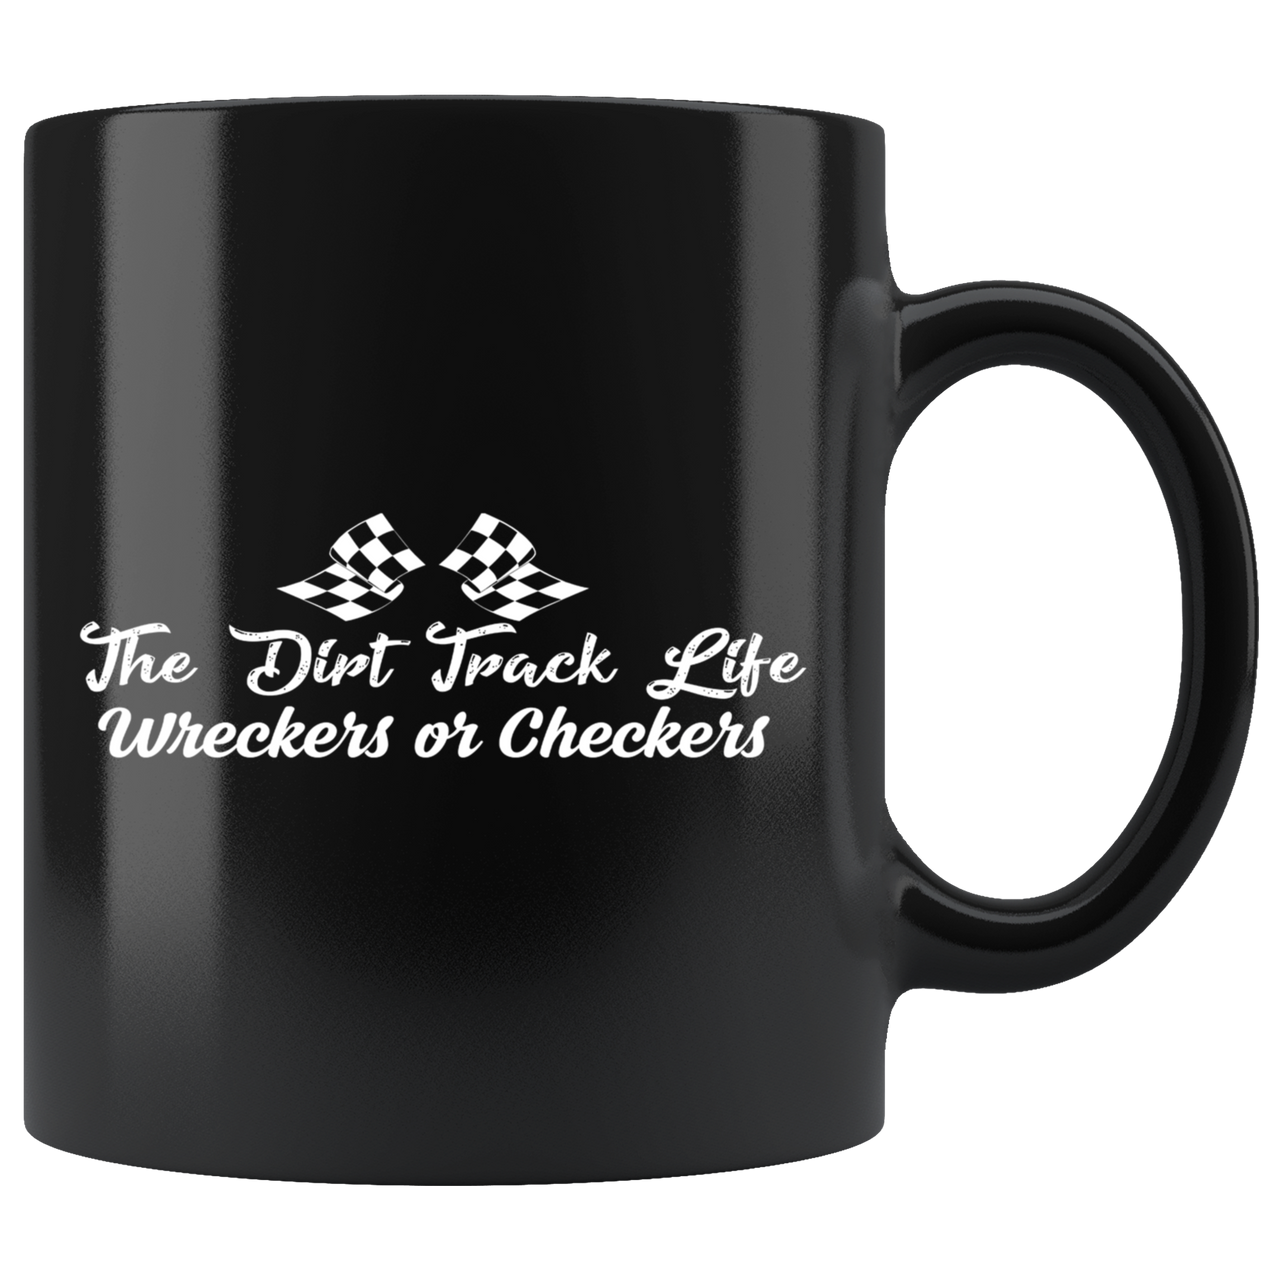 The Dirt Track Life Wreckers Or Checkers Mug!